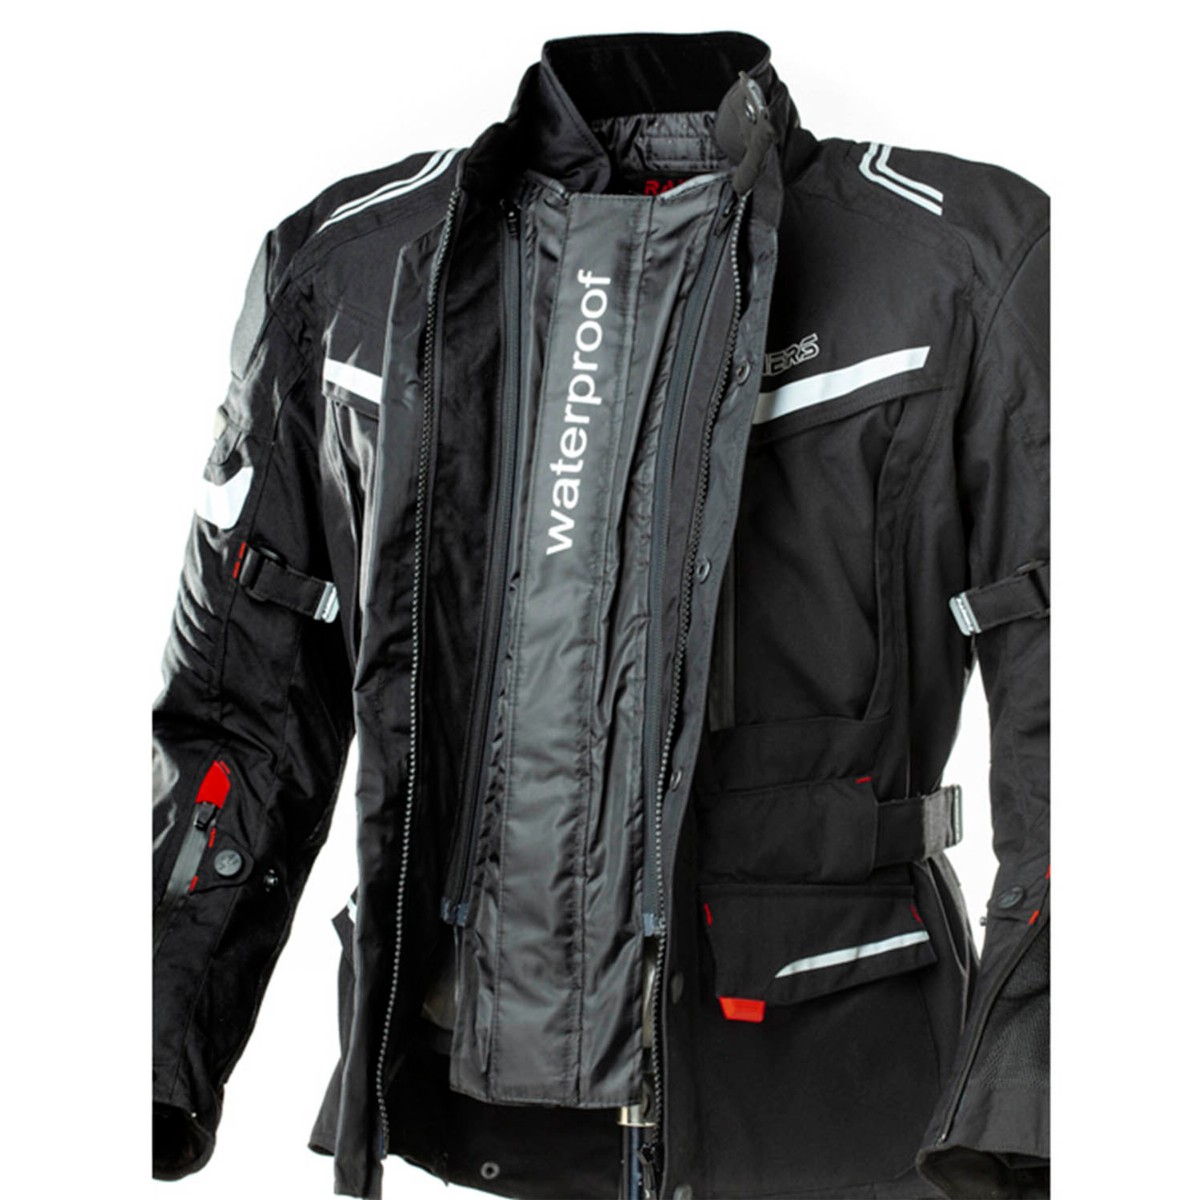 Chaqueta RAINERS TANGER NEGRA INVIERNO Impermeable 2